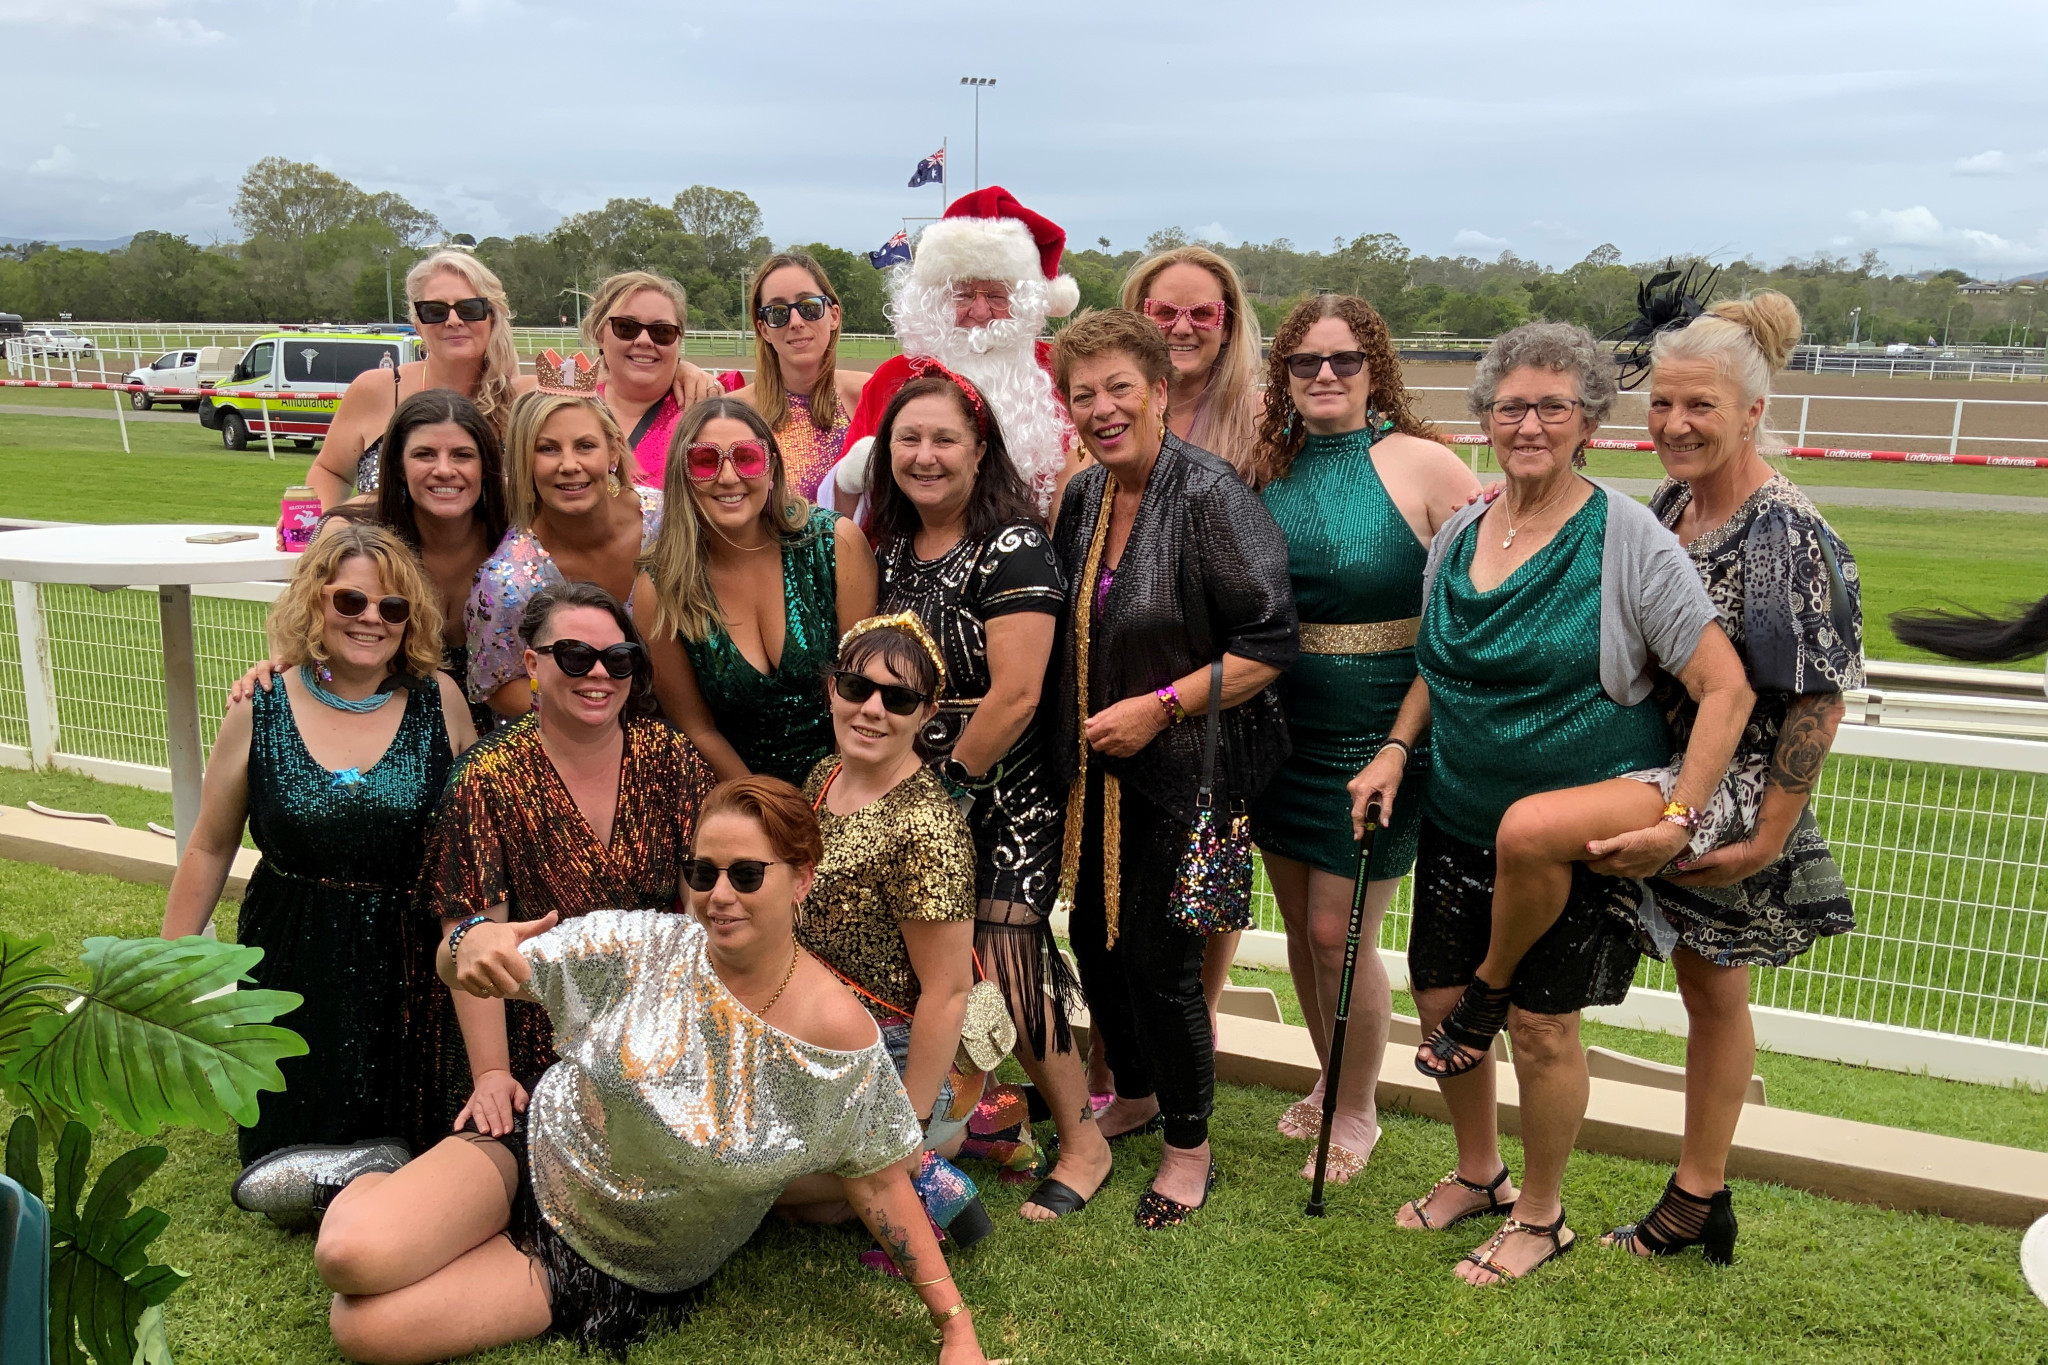 This group of racegoers took the chance to pose with Santa at the Kilcoy Christmas Cup race day.